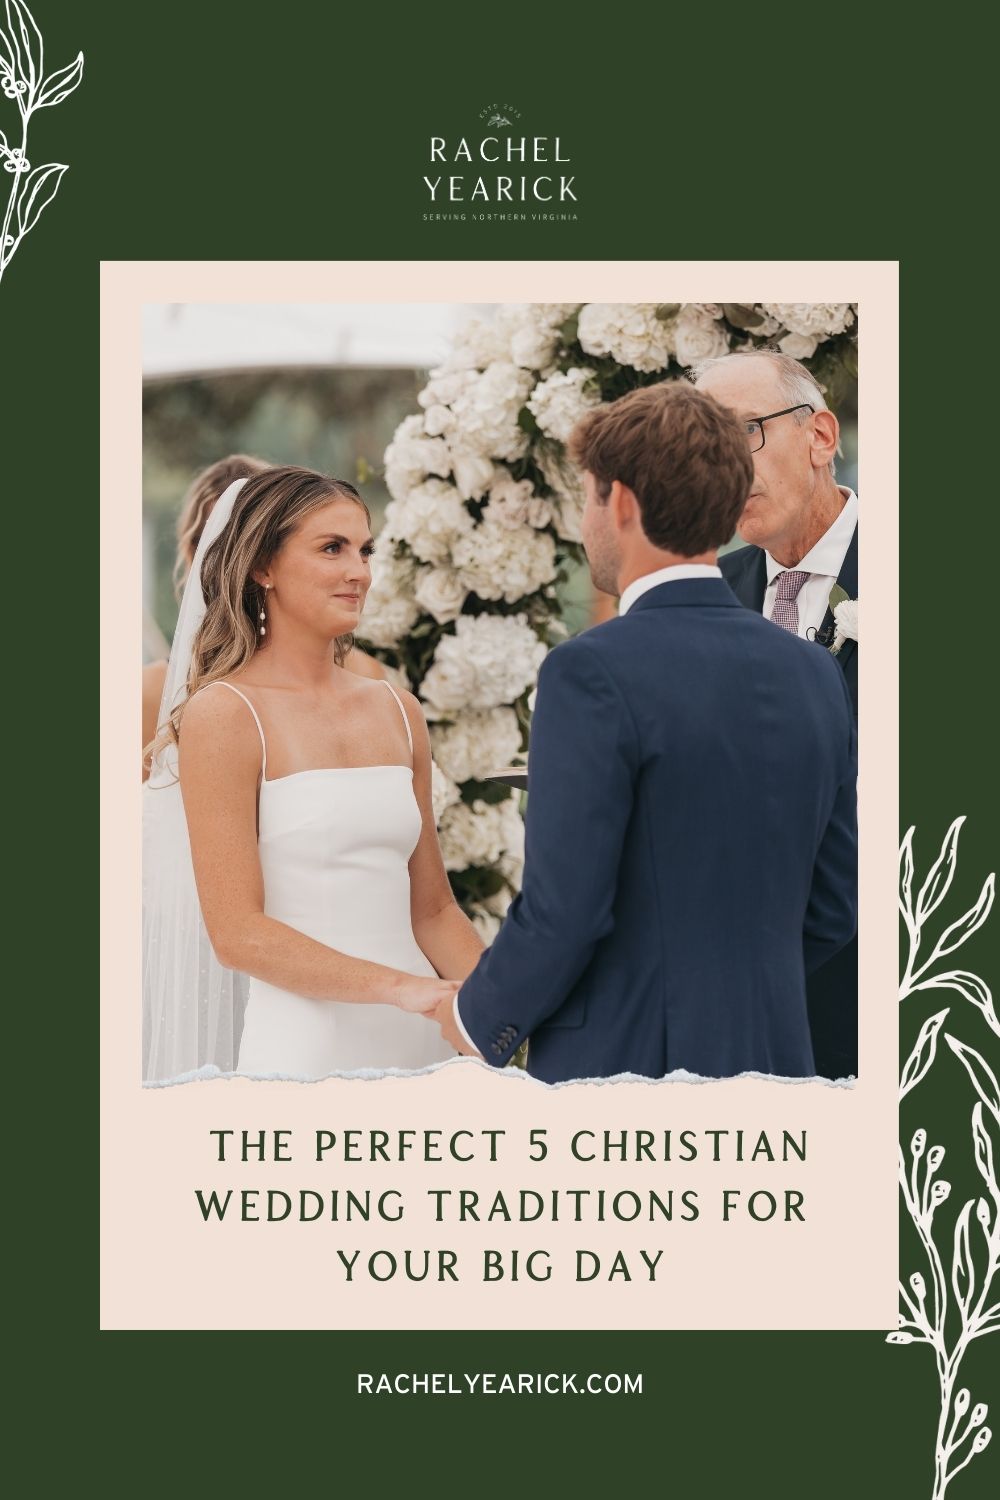 Bride looking endearingly at groom during wedding ceremony; image overlaid with text that reads The Perfect 5 Christian Wedding Traditions For Your Big Day